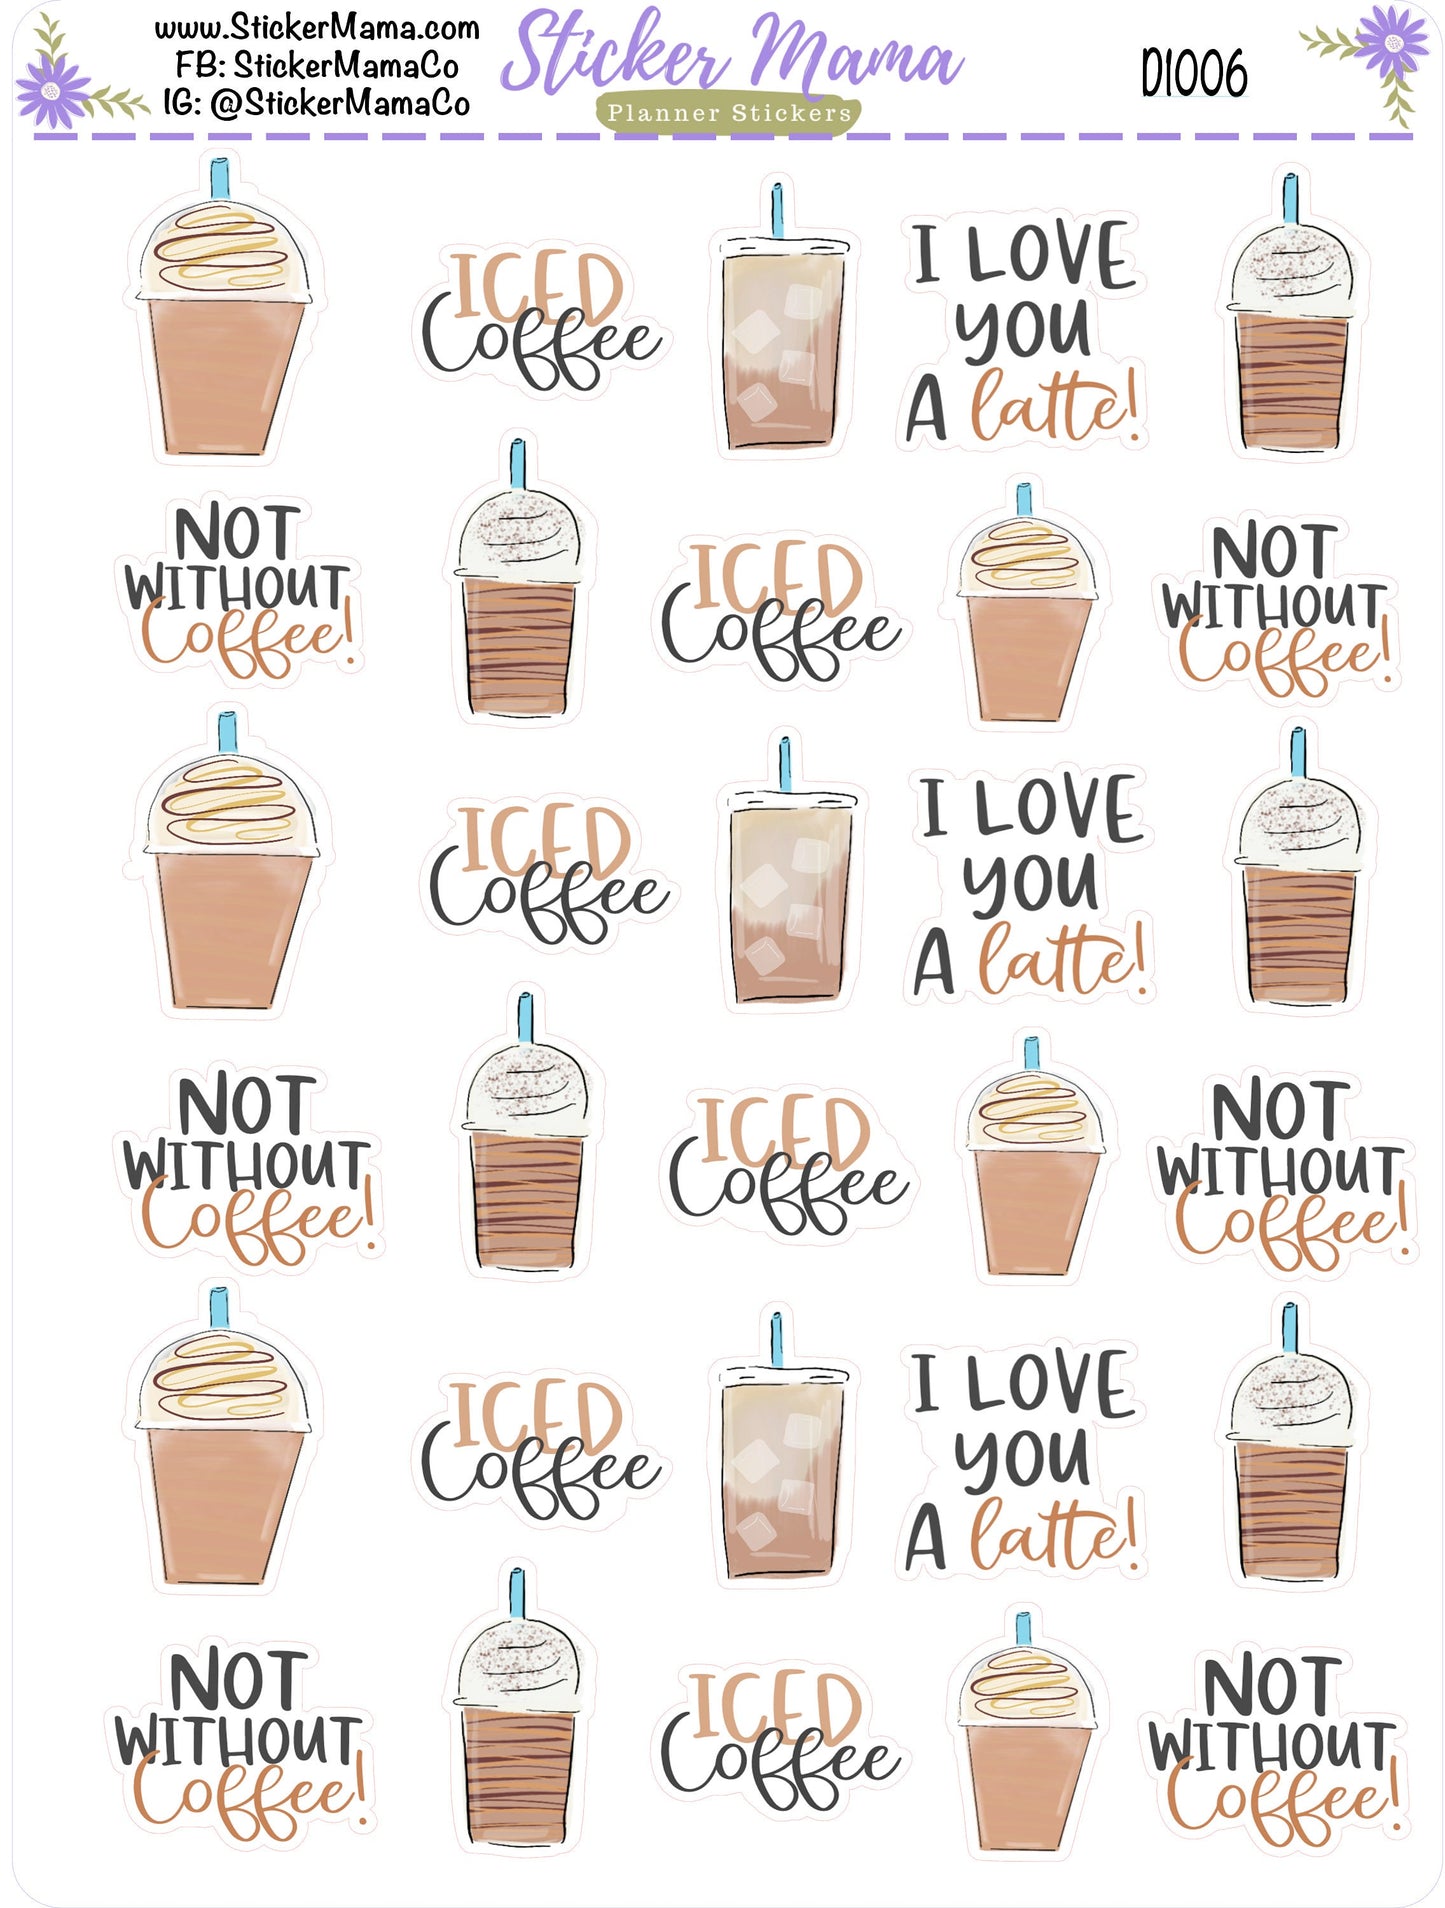 D1006 || ICED COFFEE PLANNER Stickers - Coffee Stickers - Coffee Lover - Stickers for Coffee Lovers